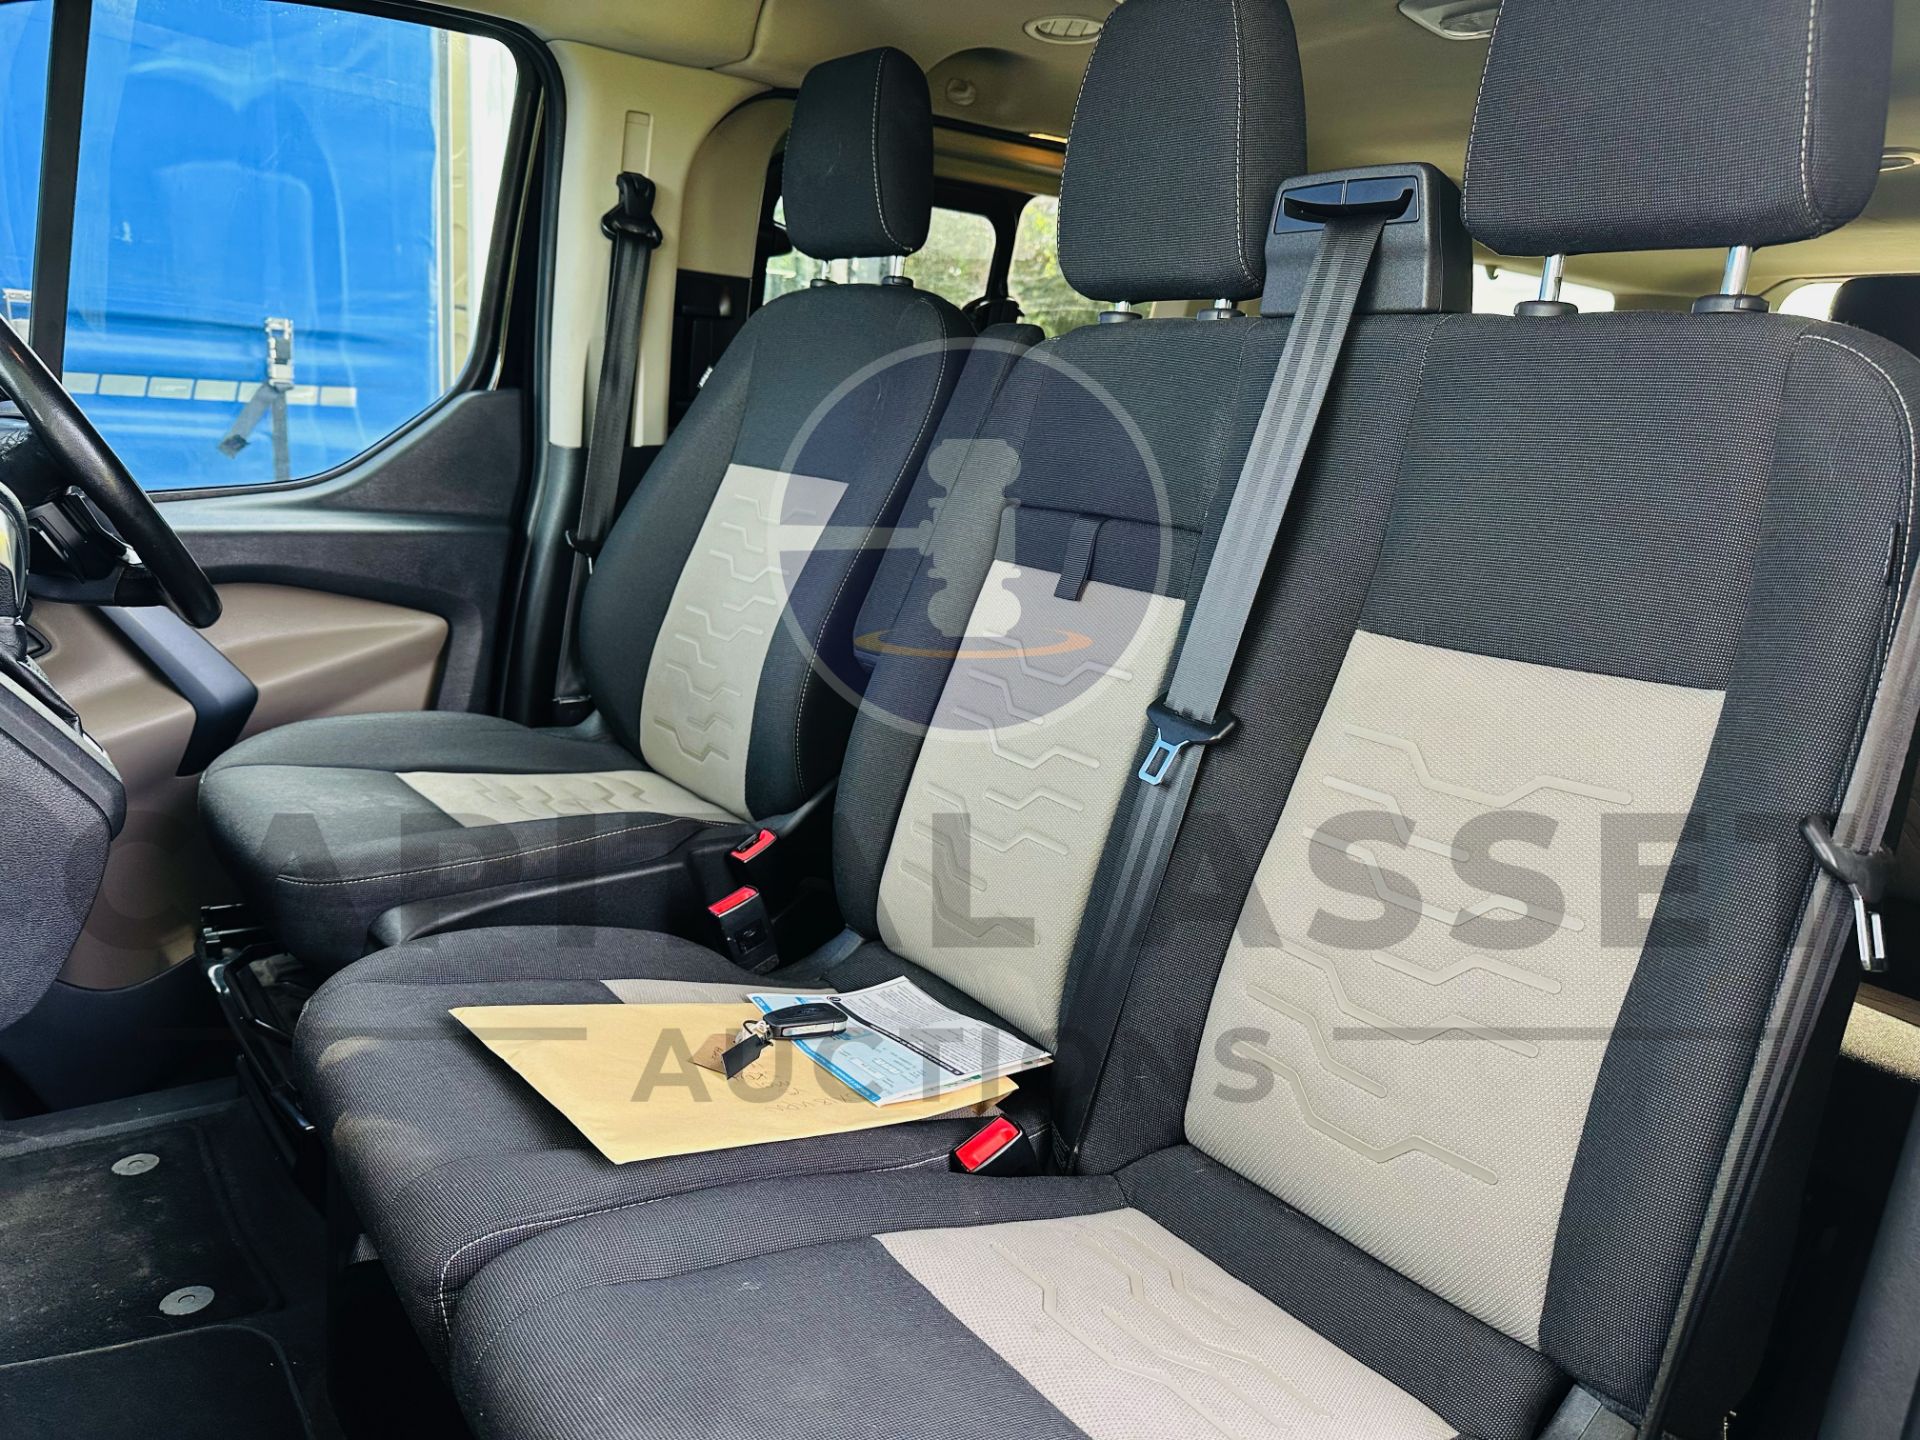 (On Sale) FORD TRANSIT TOURNEO CUSTOM *LWB 9 SEATER BUS* (2018 - EURO 6) 2.0 TDCI - AUTO (1 OWNER) - Image 24 of 42